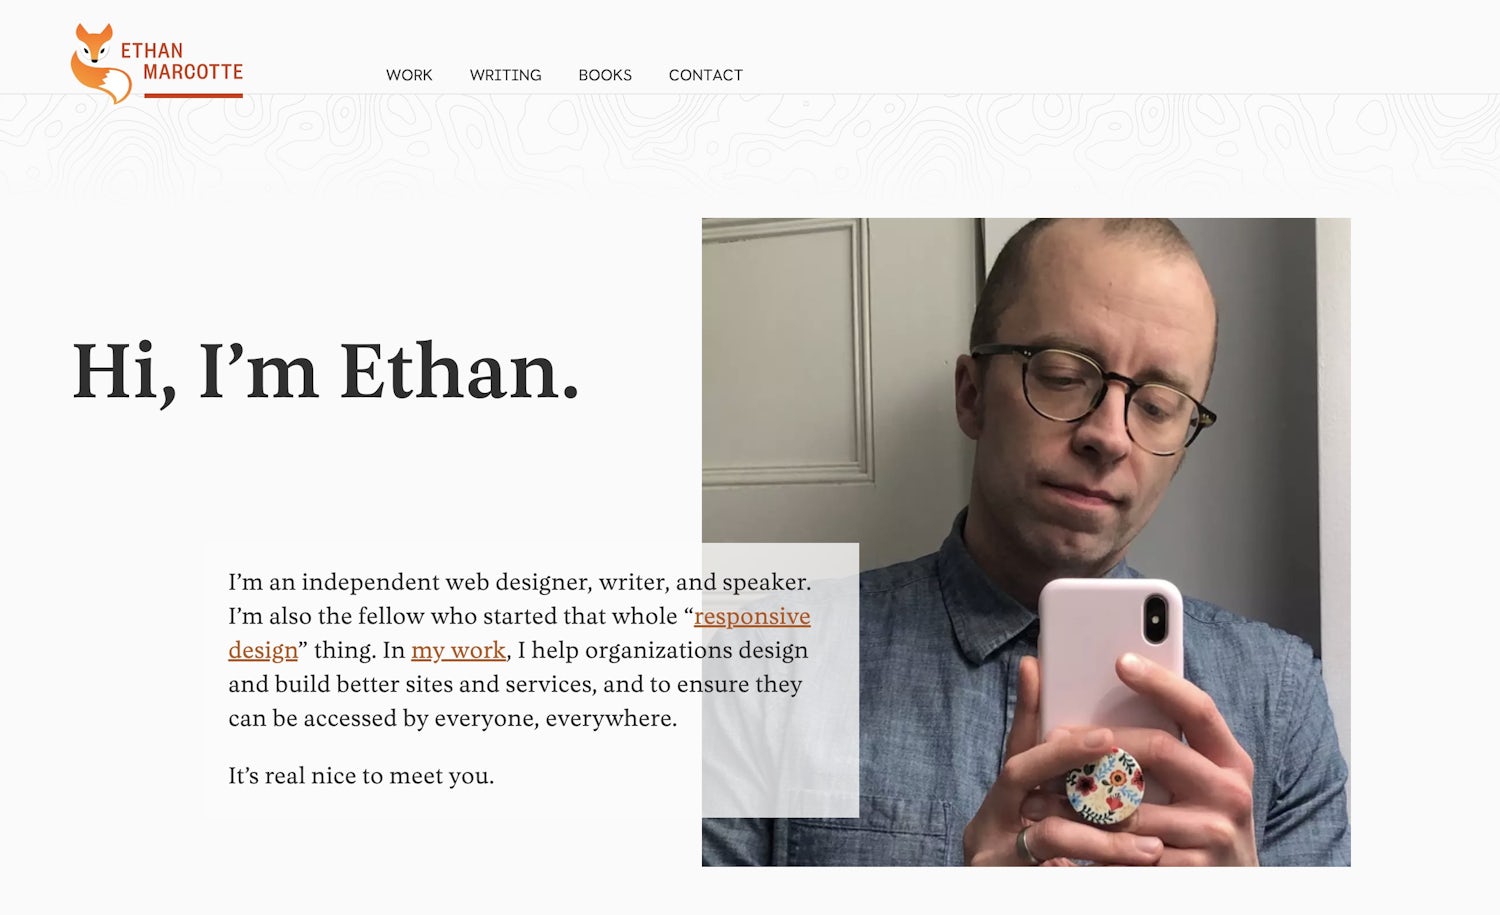 Ethan’s homepage with a lovely grid layout